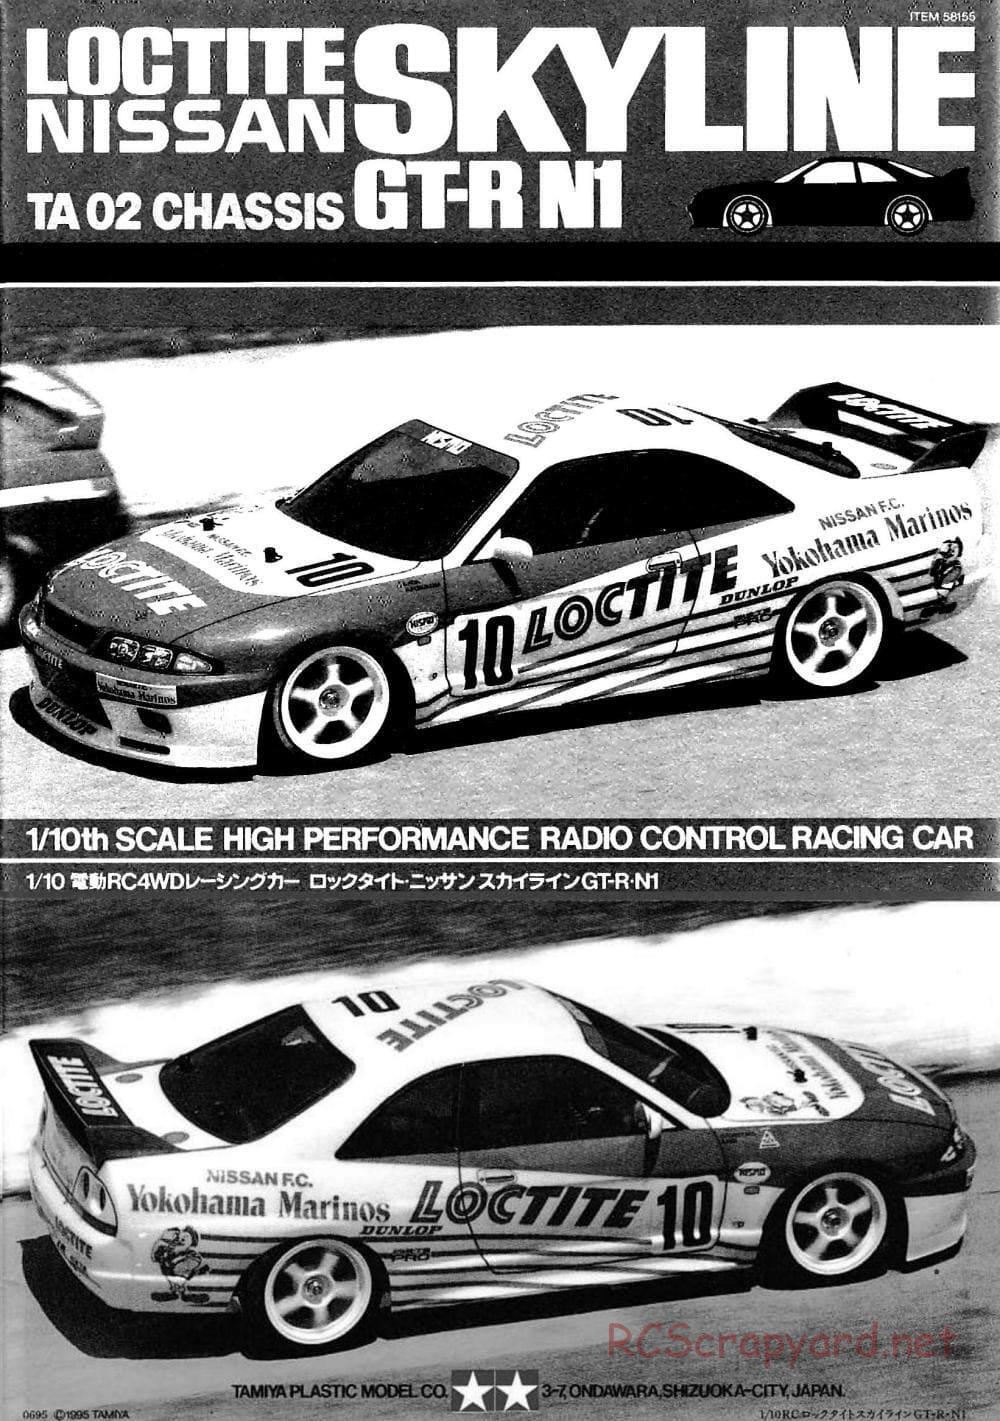 Tamiya - Loctite Nissan Skyline GT-R N1 - TA-02 Chassis - Manual - Page 1